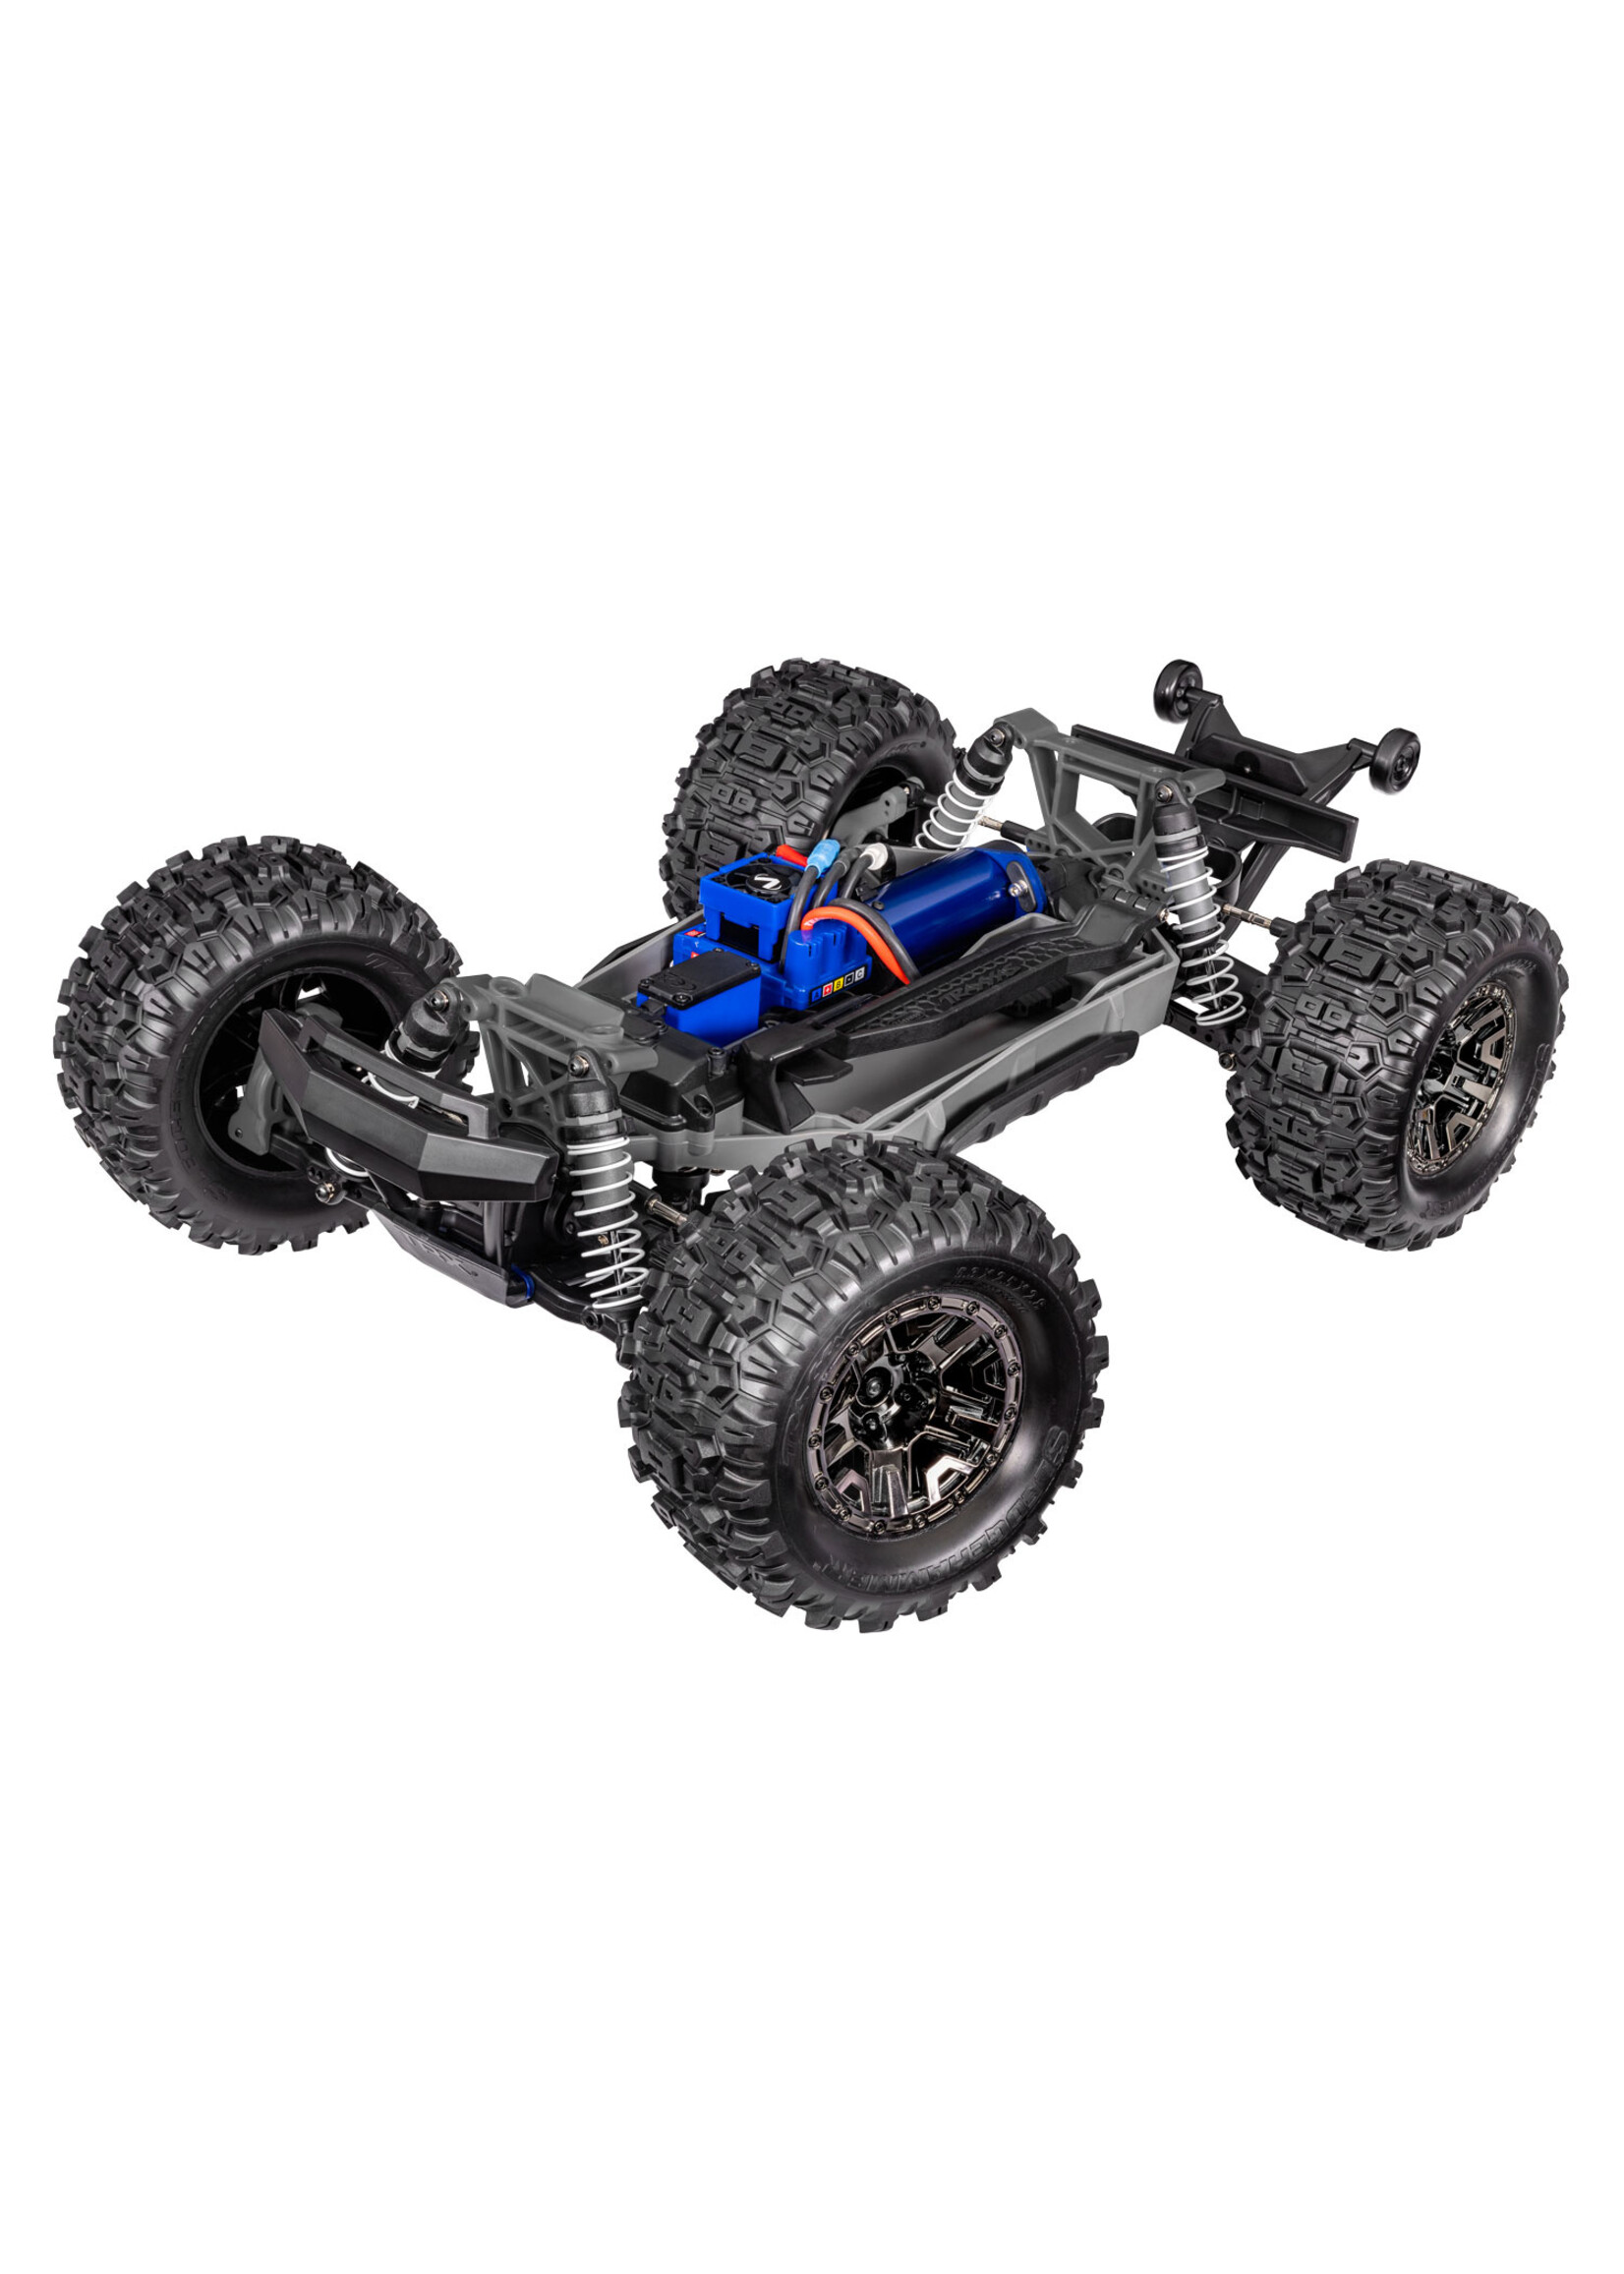 Traxxas 903764RED - Stampede 4x4 VXL HD - Red